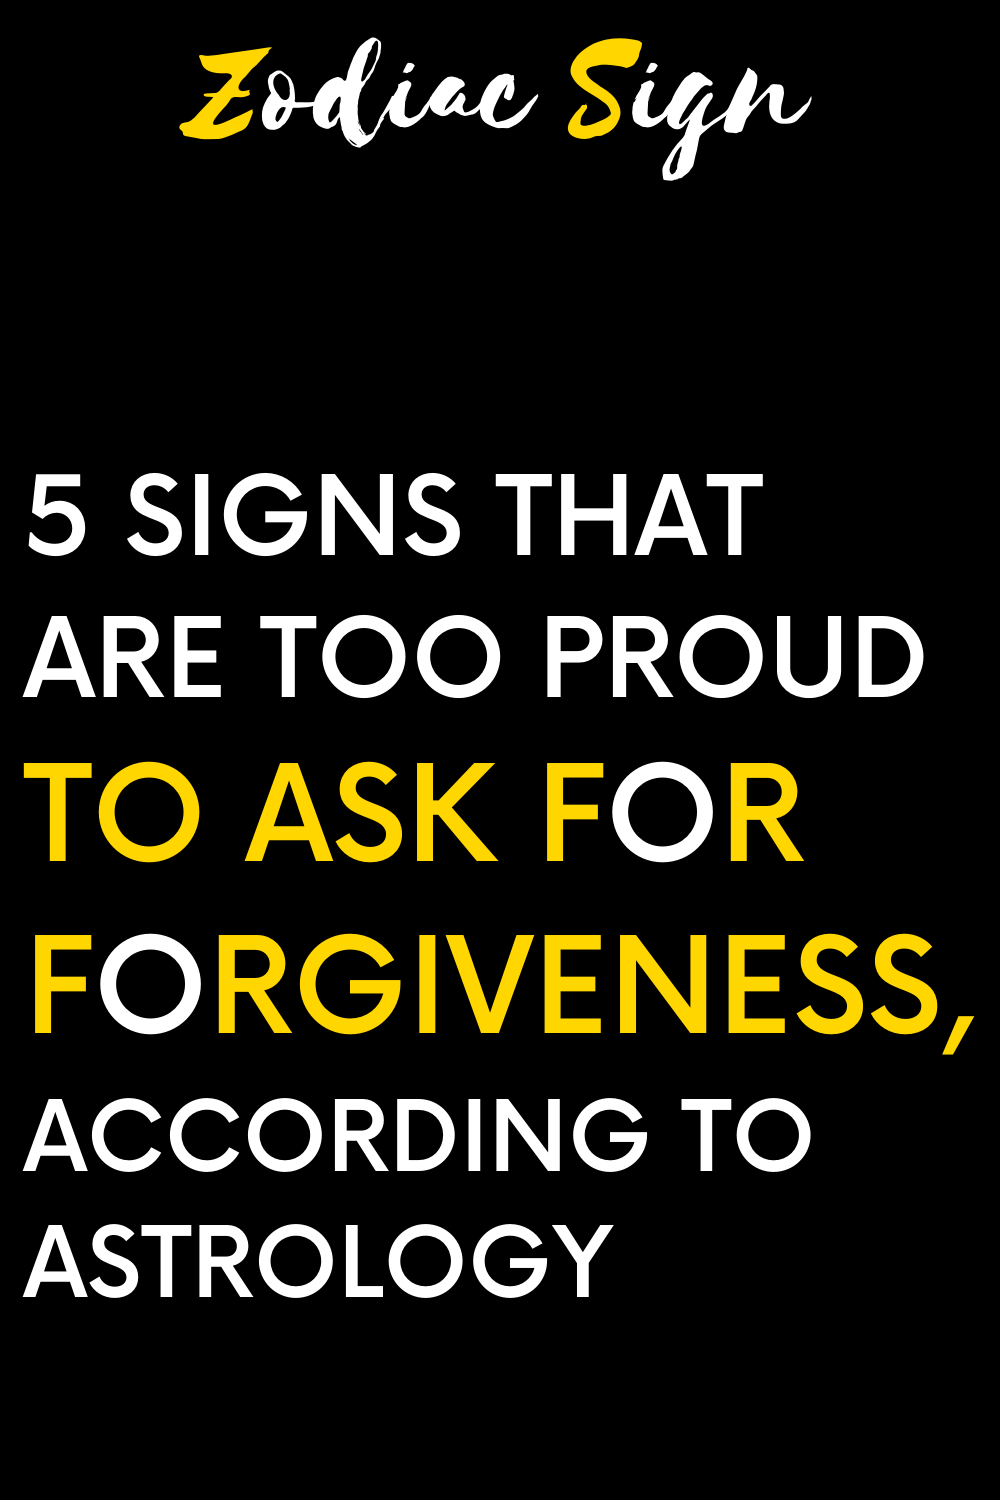 5 signs that are too proud to ask for forgiveness, according to astrology